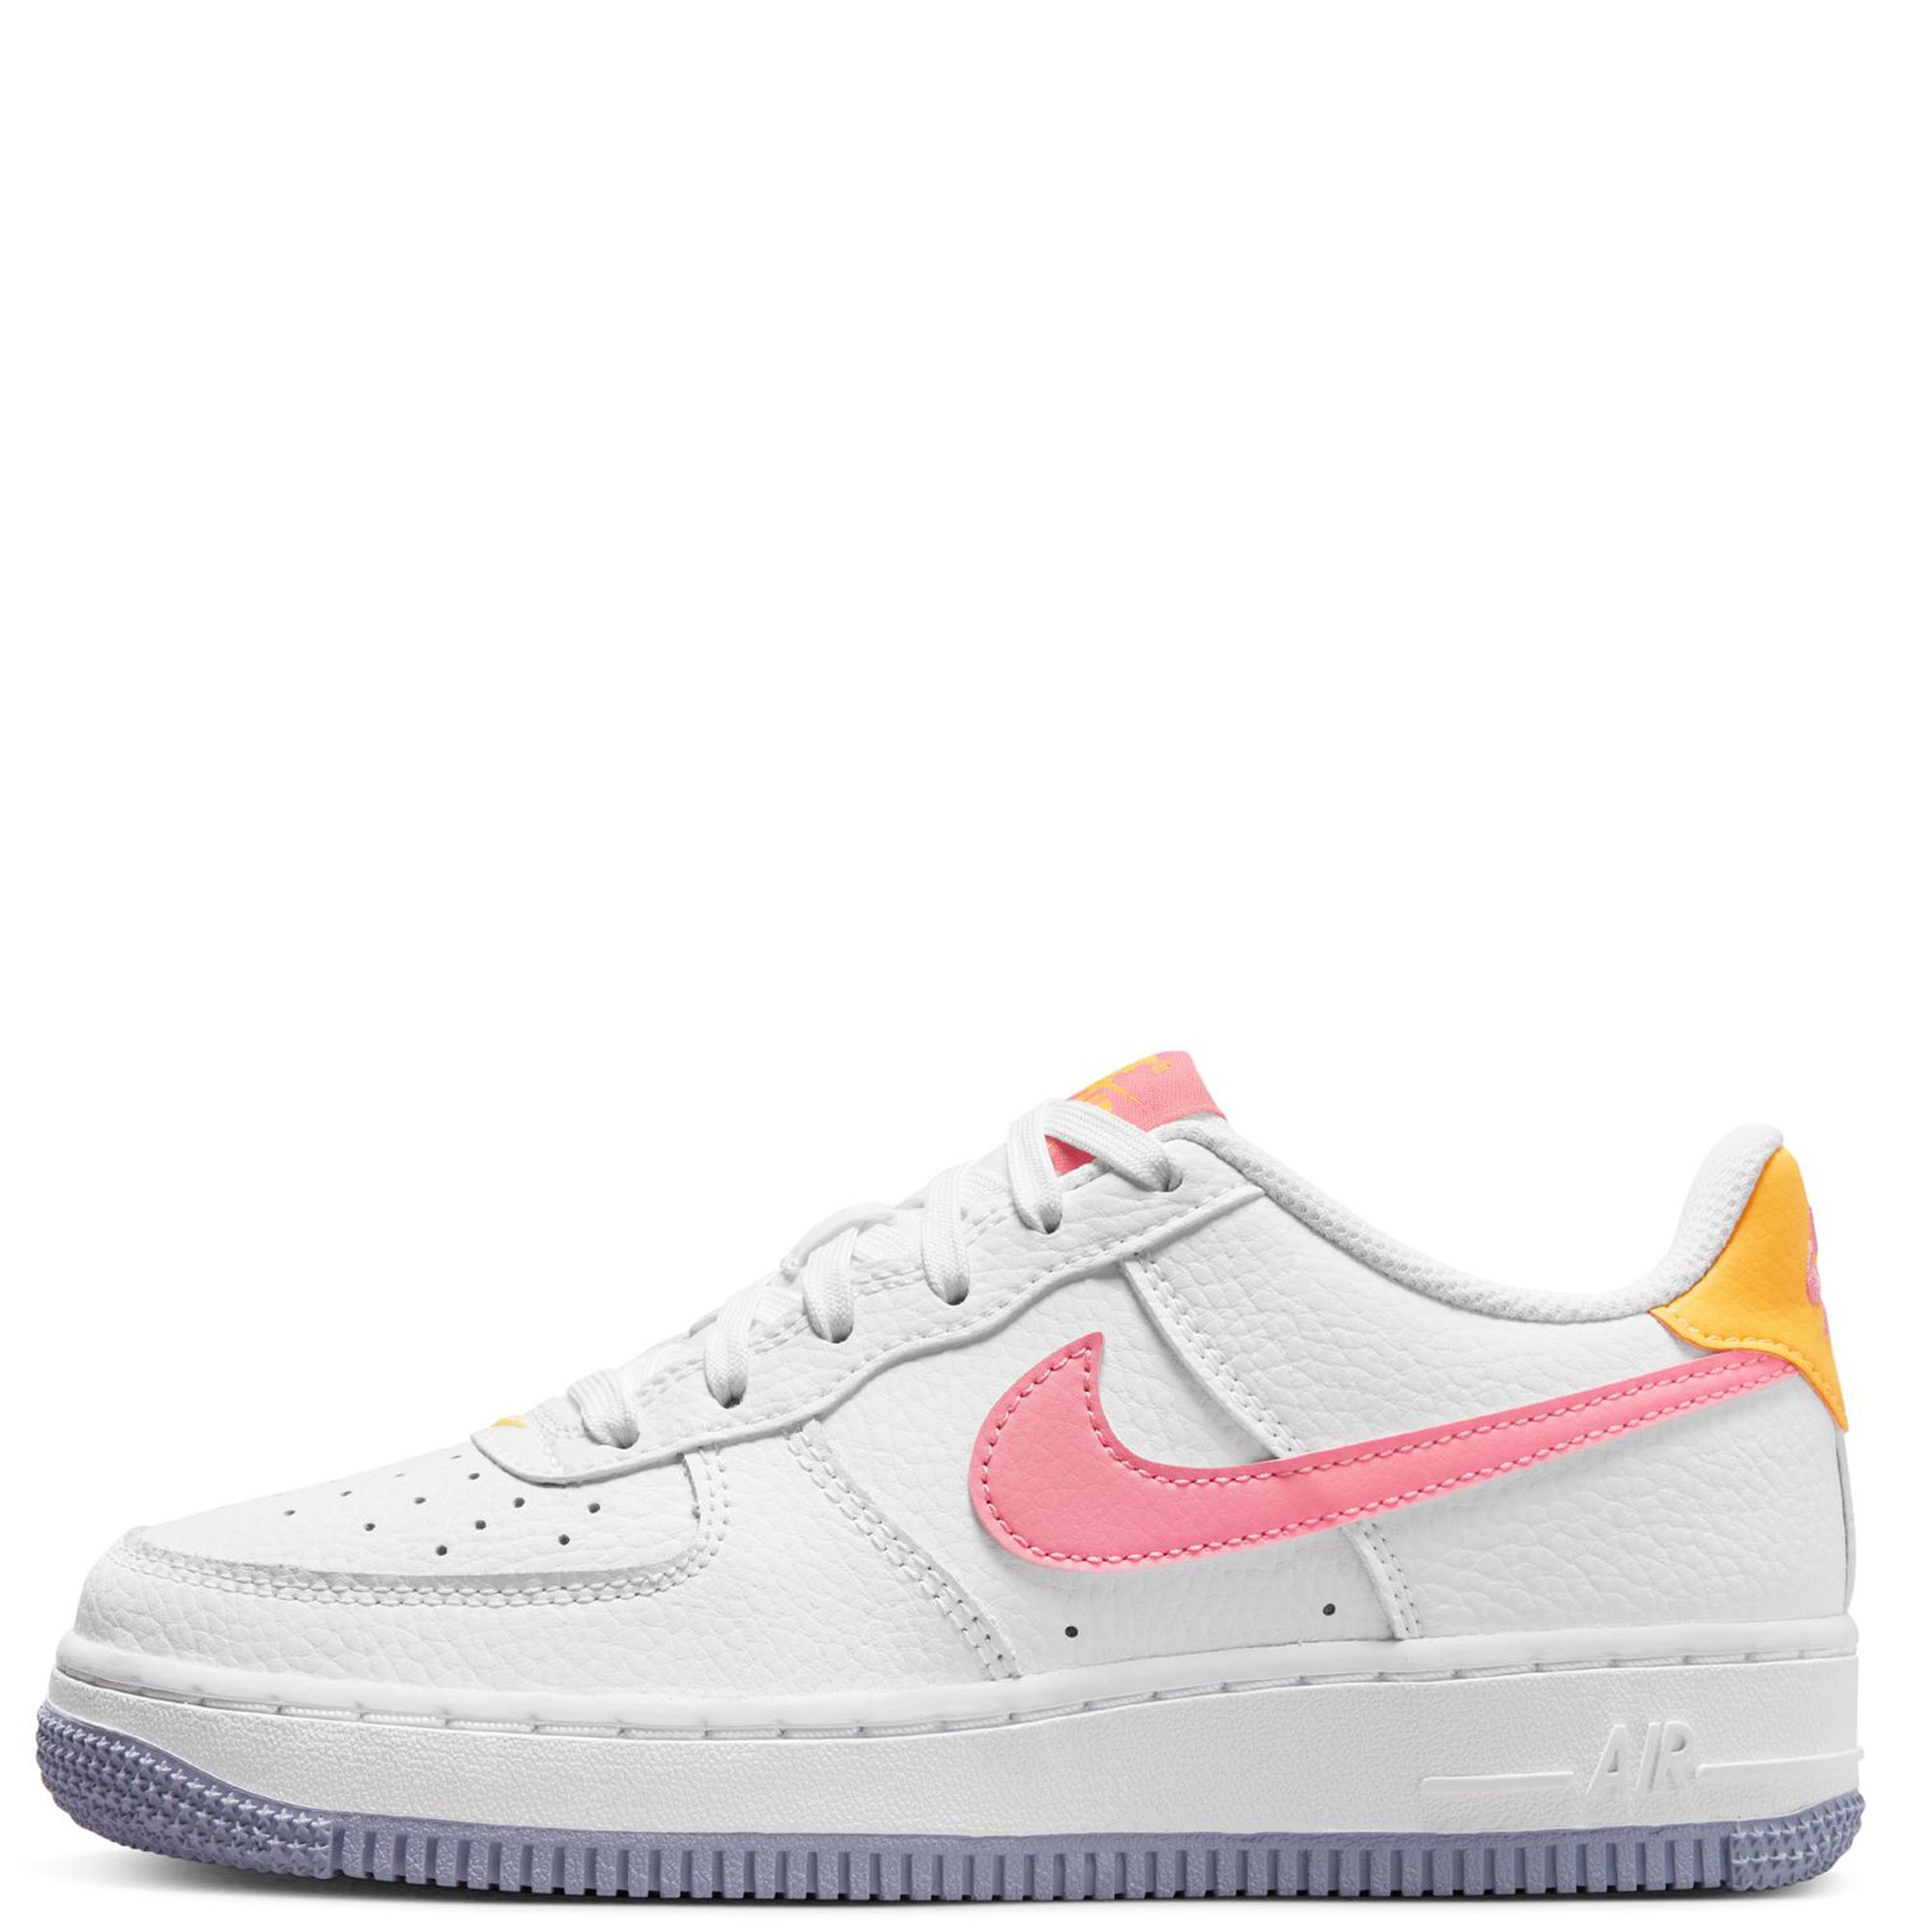 Nike Air Force 1 Low Grade School Basketball Shoes